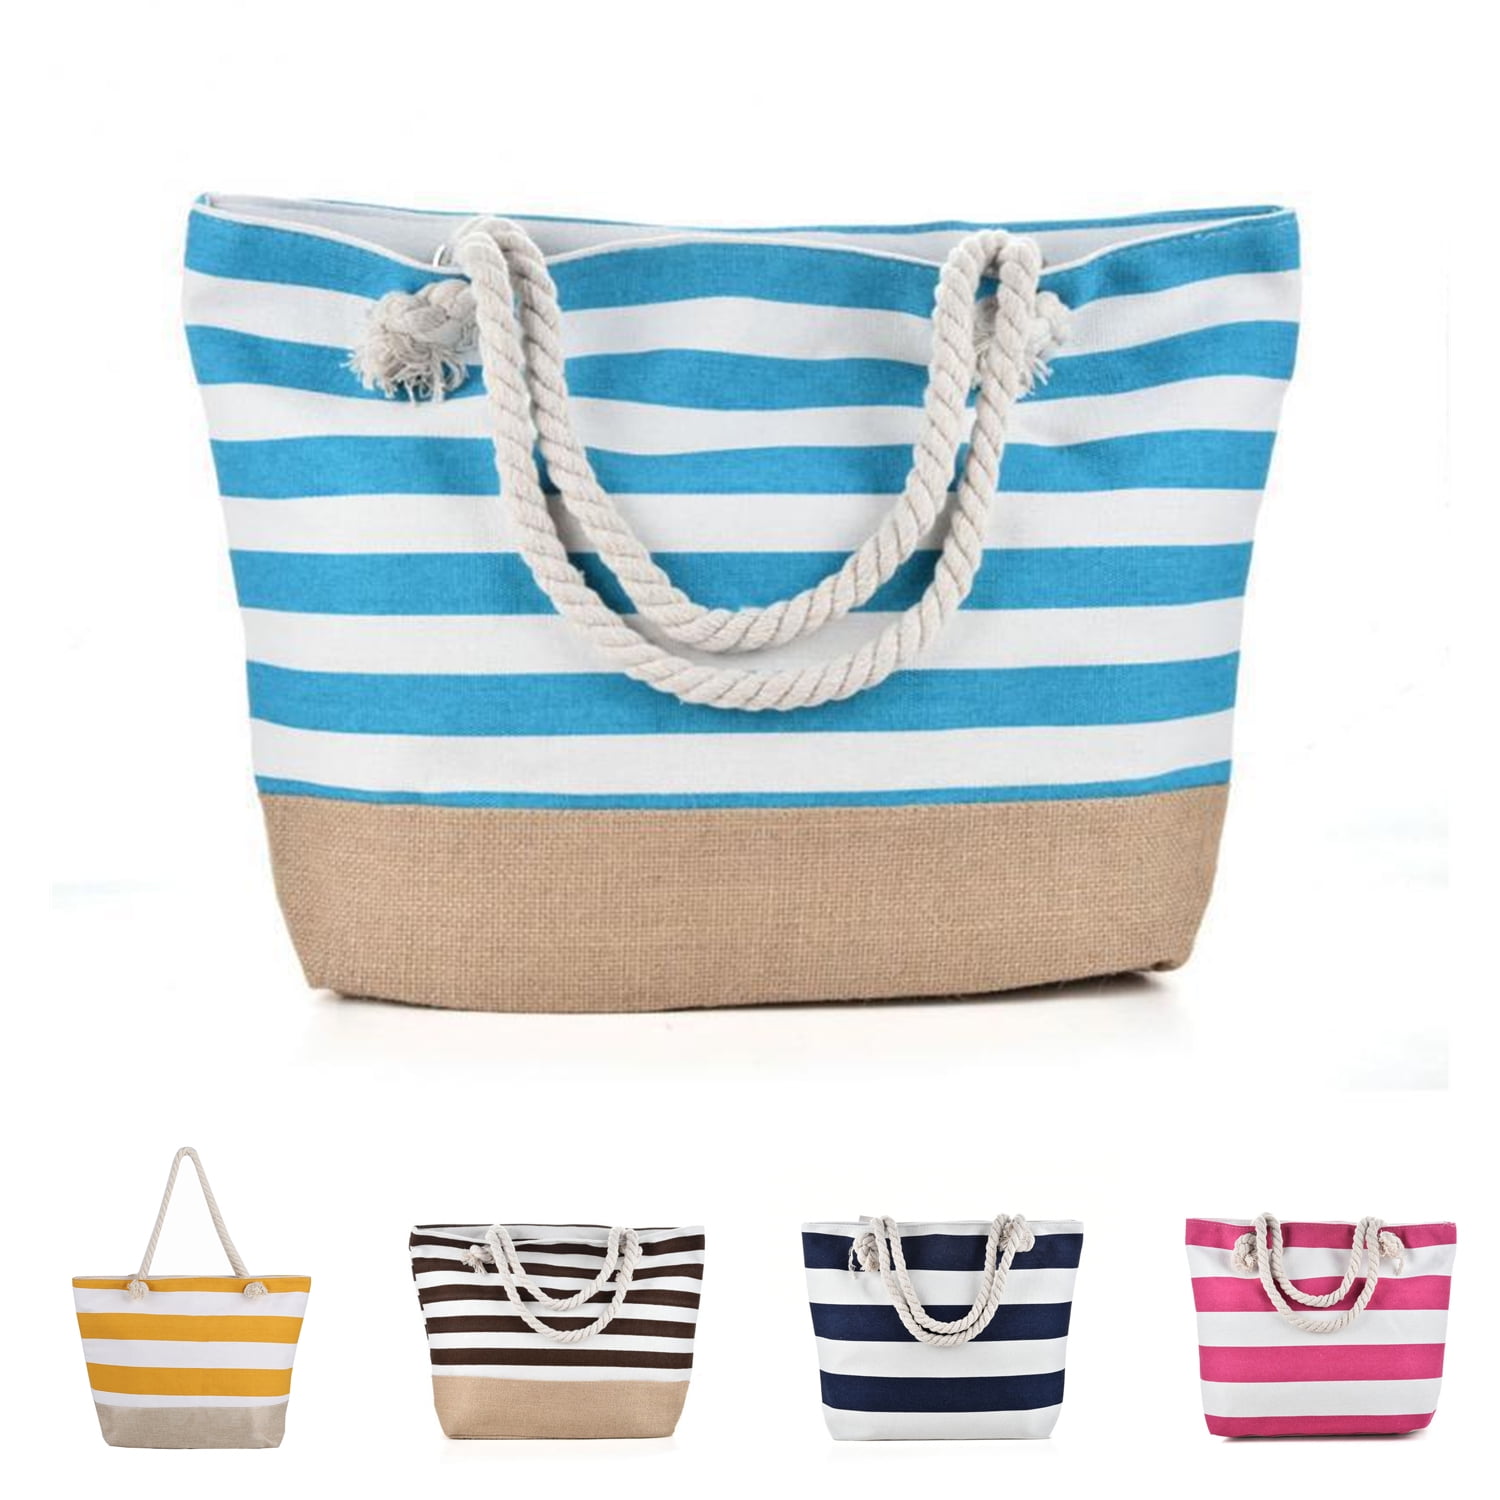 Large Capacity Pu Casual And Fashionable Tote Bag With Foldable,  Lightweight And Simple Design For Women. Ideal For Students, Holidays,  Shopping And Daily Use